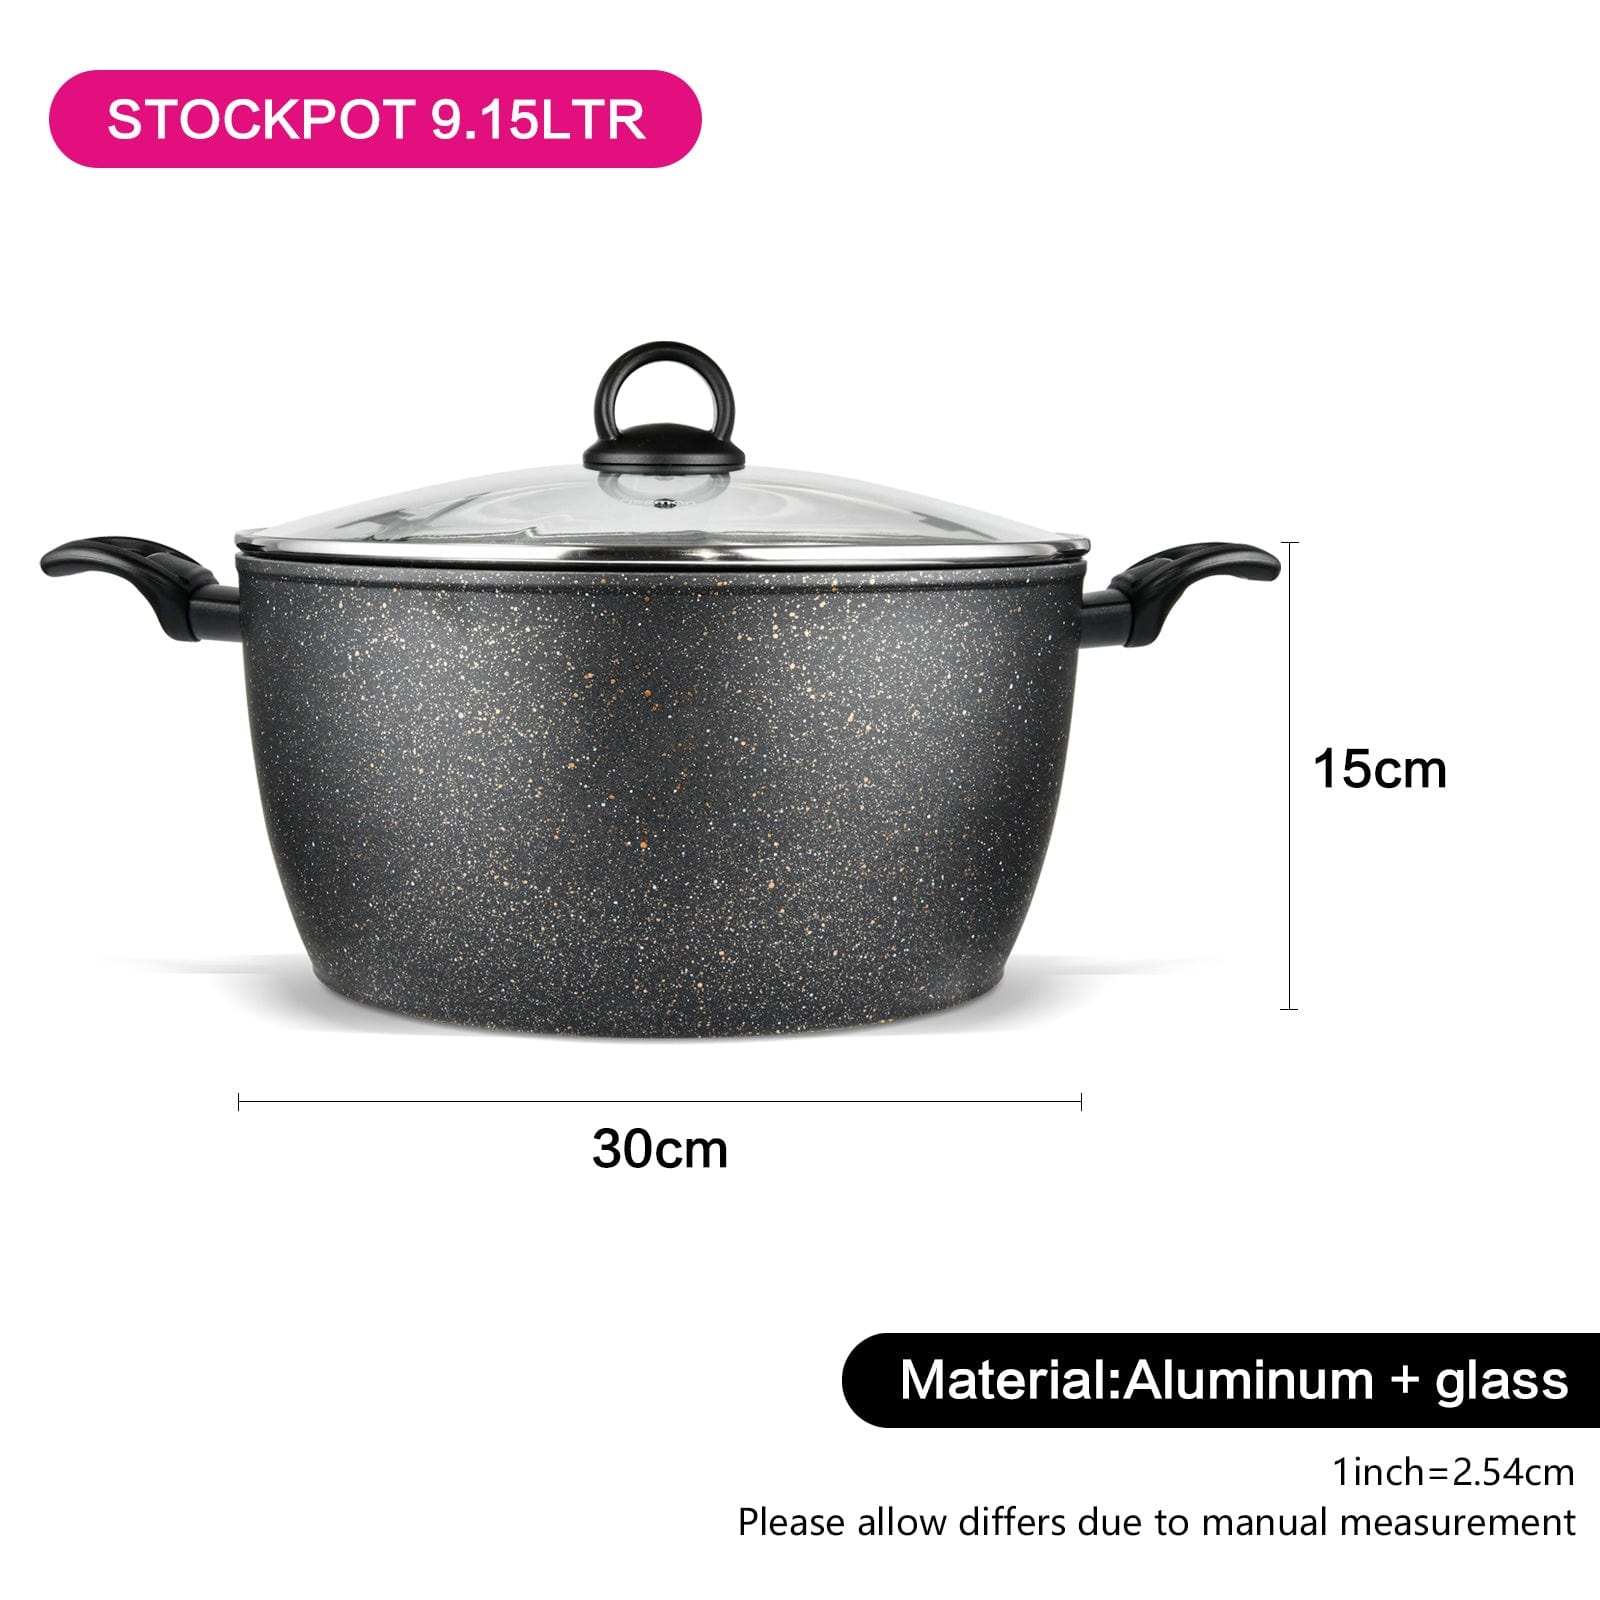 Fissman Stockpot Magna Series Aluminum TouchStone Coating With Induction Bottom And Glass Lid For All Types Of Stoves Black 30x15cm/9.5LTR